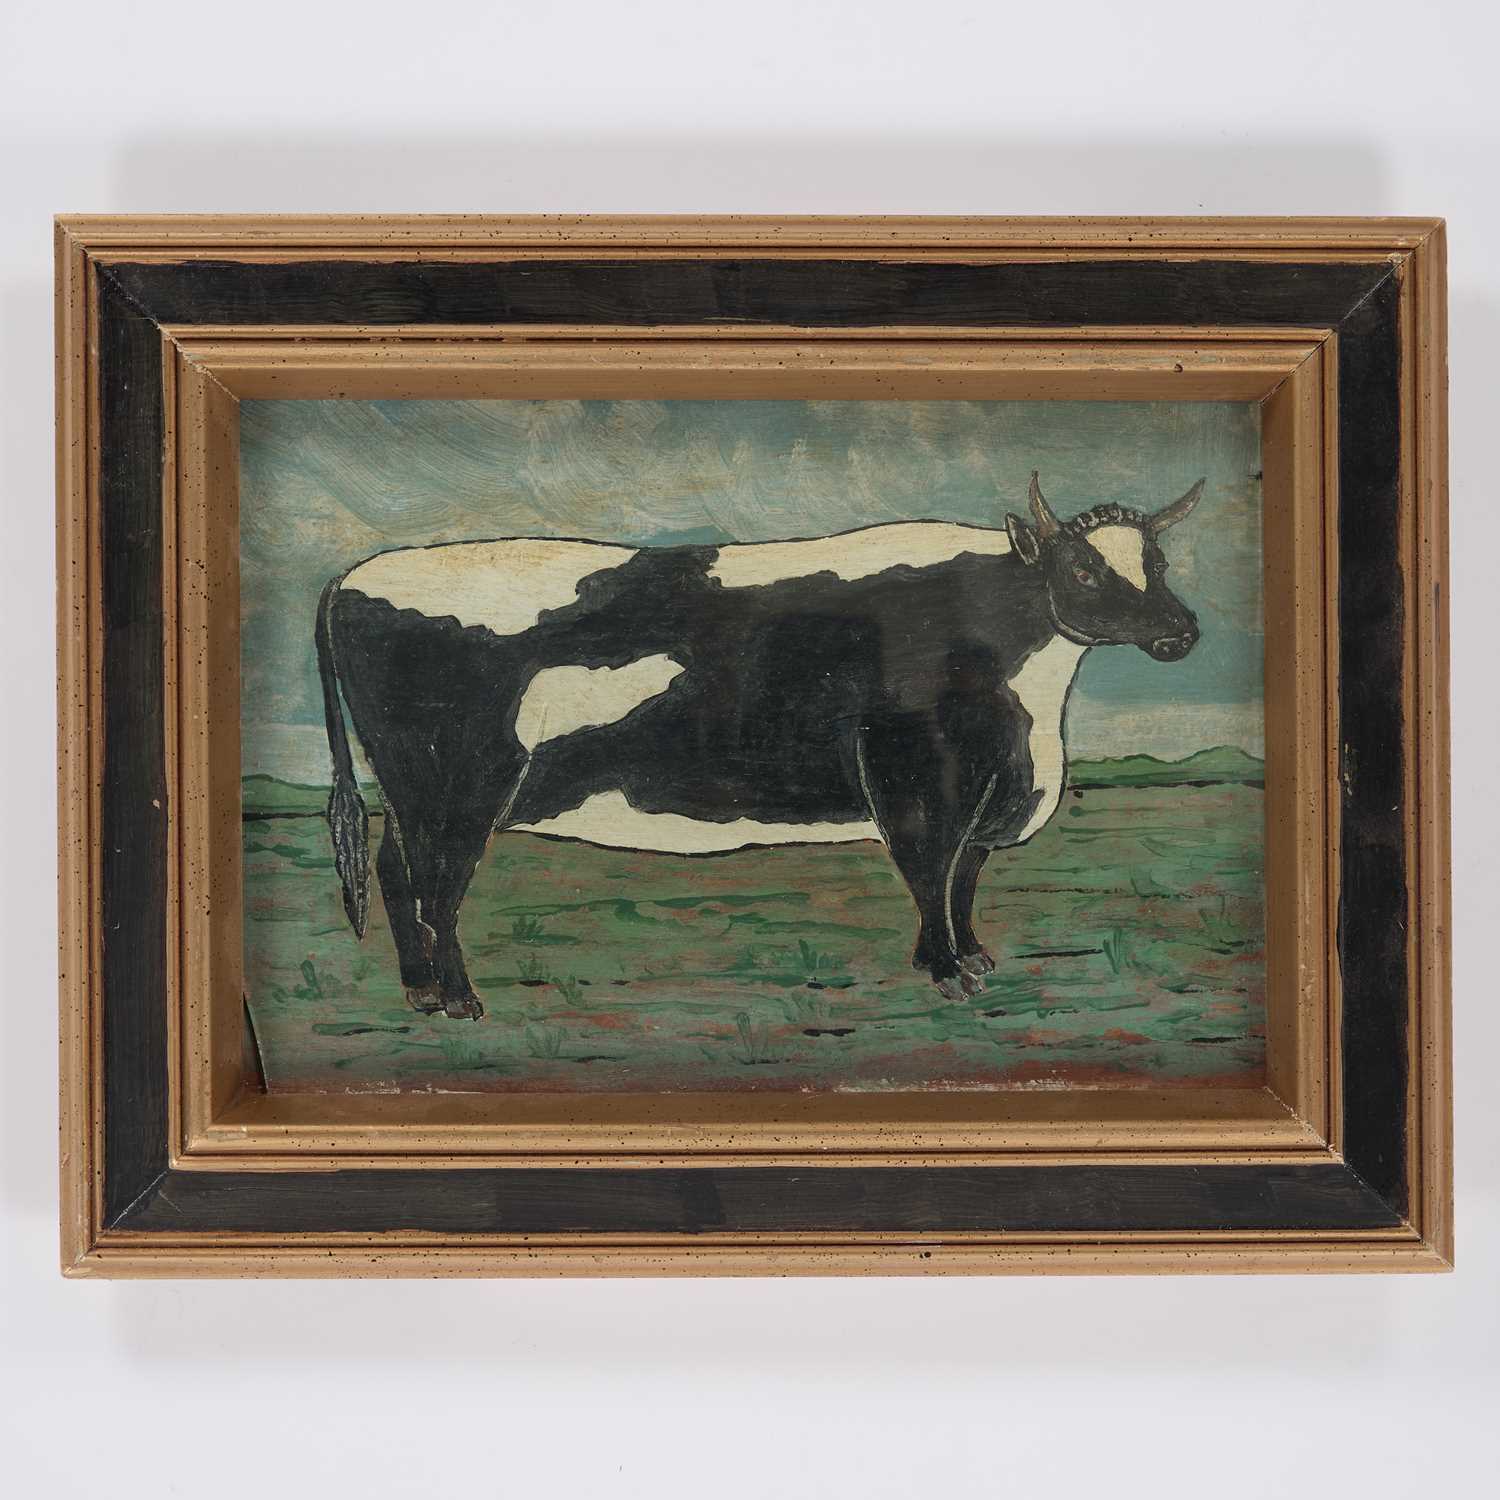 ENGLISH NAIVE SCHOOL (LATE 19TH CENTURY) PORTRAIT OF A COW - Image 2 of 2